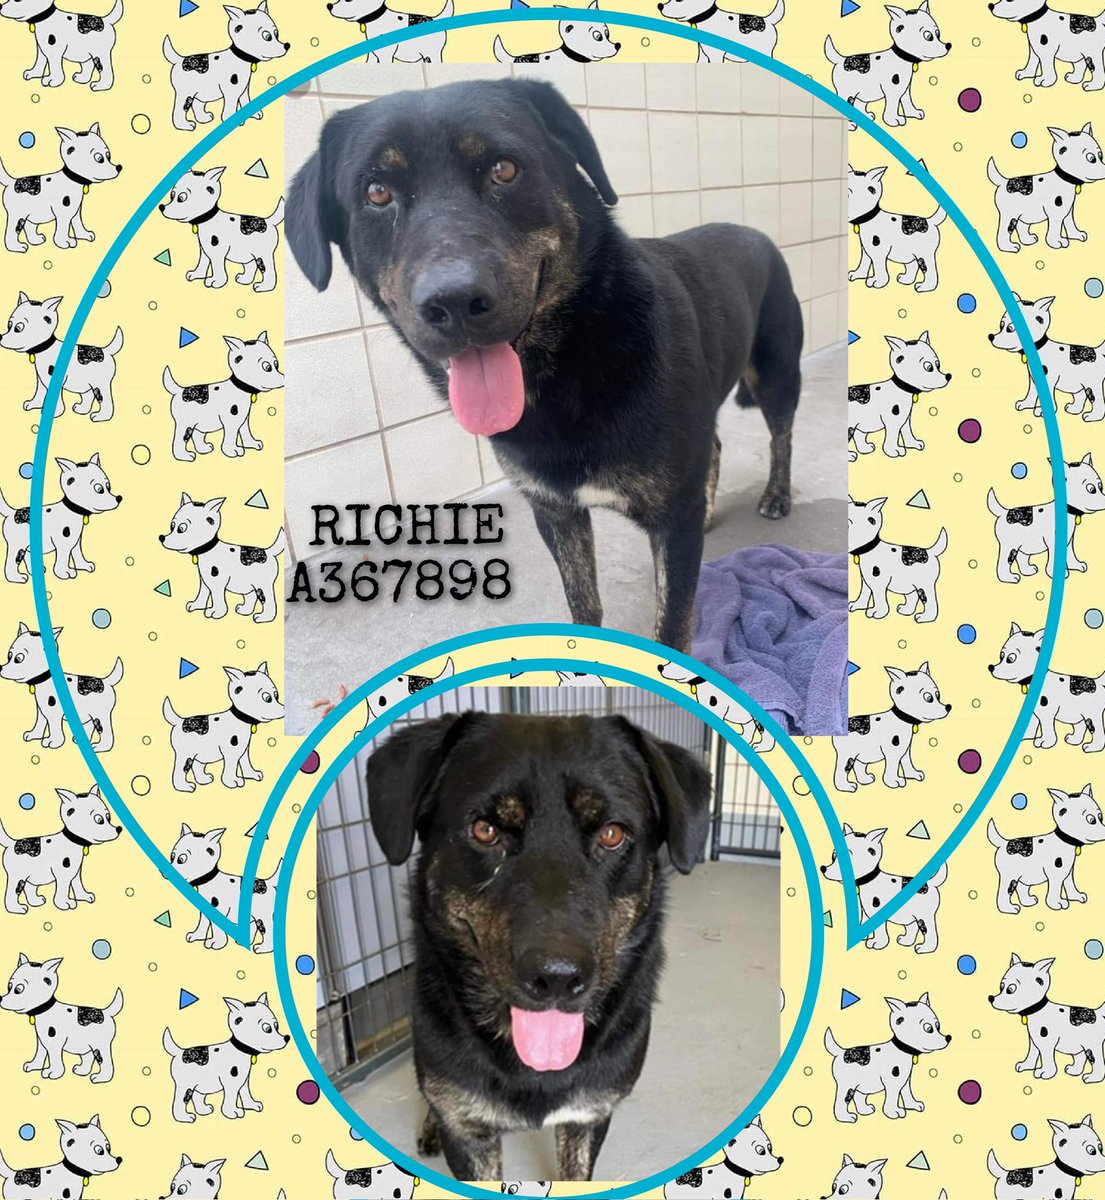 ‼️‼️update‼️correction RICHIE #A367898 is alive‼️#CorpusChristiACS took down his link on Pet Connect and removed his kennel card 5/10
The shelter has now said RICHIE has until 5/14
Needs #MedicalRescue 🦺🛟😇please RT,  #PledgeForRescue if possible,  we lost a day of trying😢😭